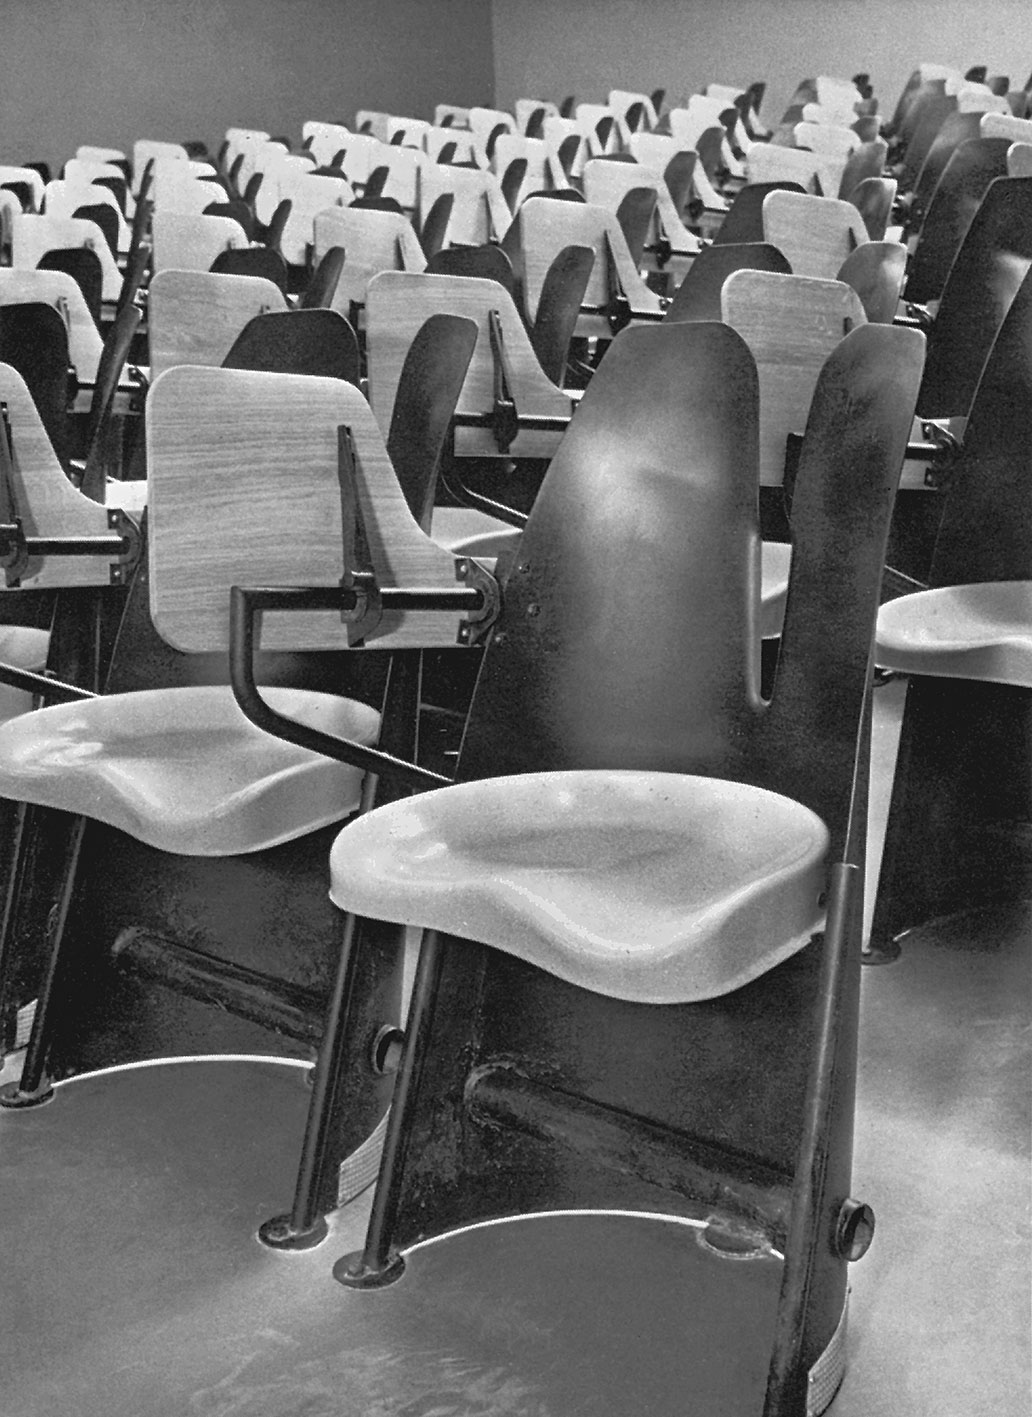 Lecture hall furnished with lecture hall chairs, a.k.a. Bergères, ca. 1952.